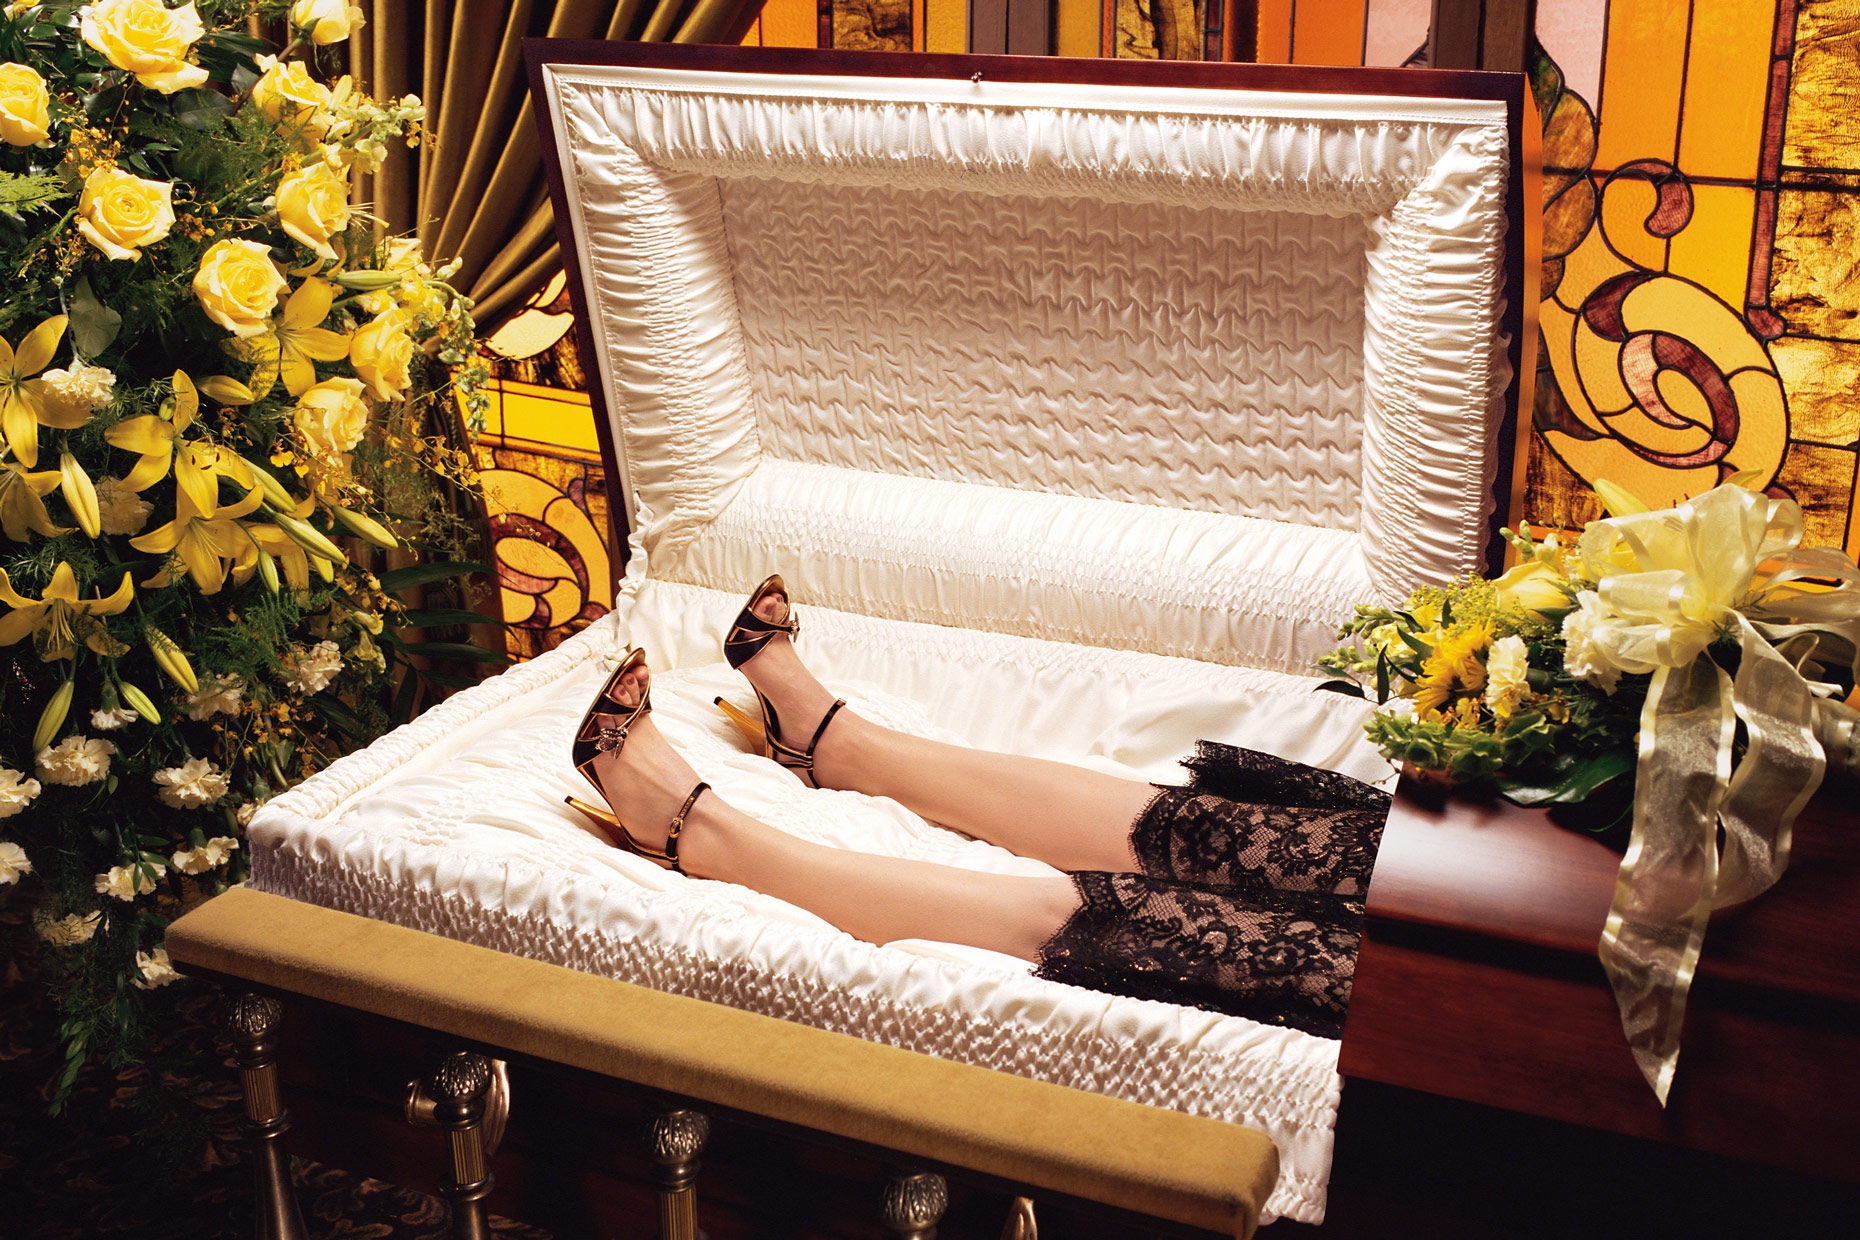 woman laying backward in a casket with high heel shoes | Conceptual photography by Saverio Truglia